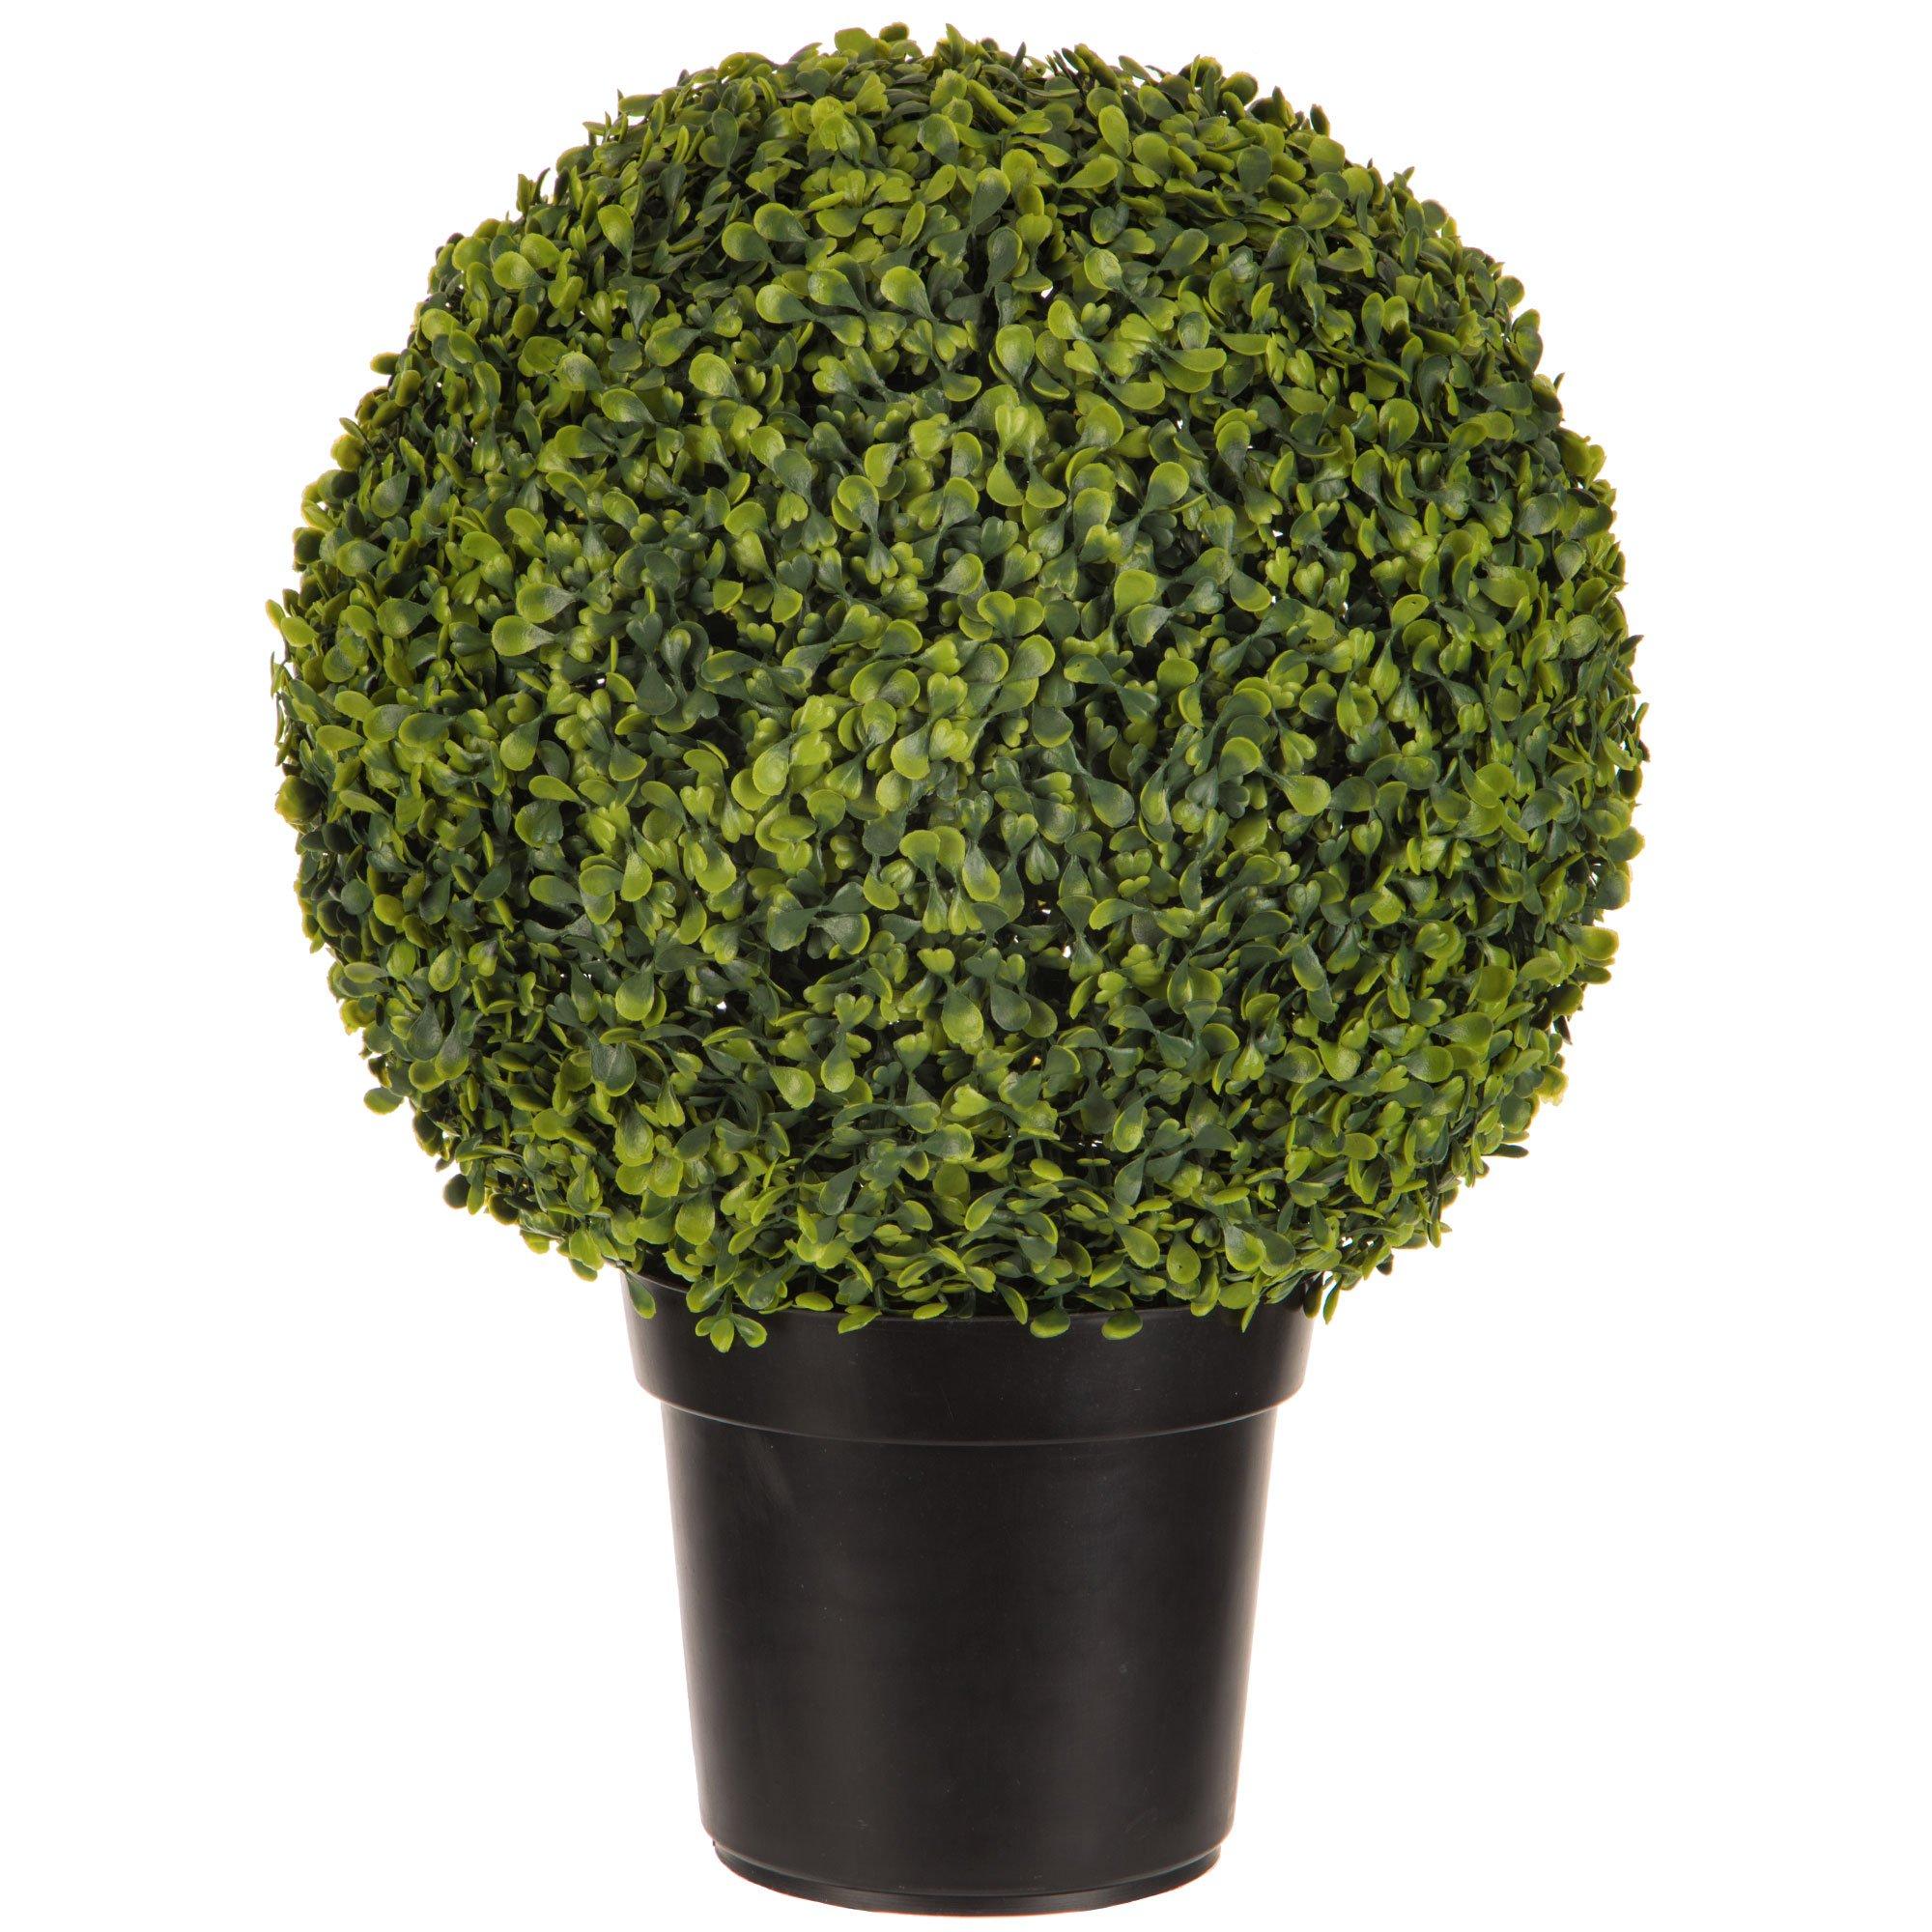 2 Pieces 19 inch Artificial Topiary Balls Faux Boxwood Ball Plants | Costway